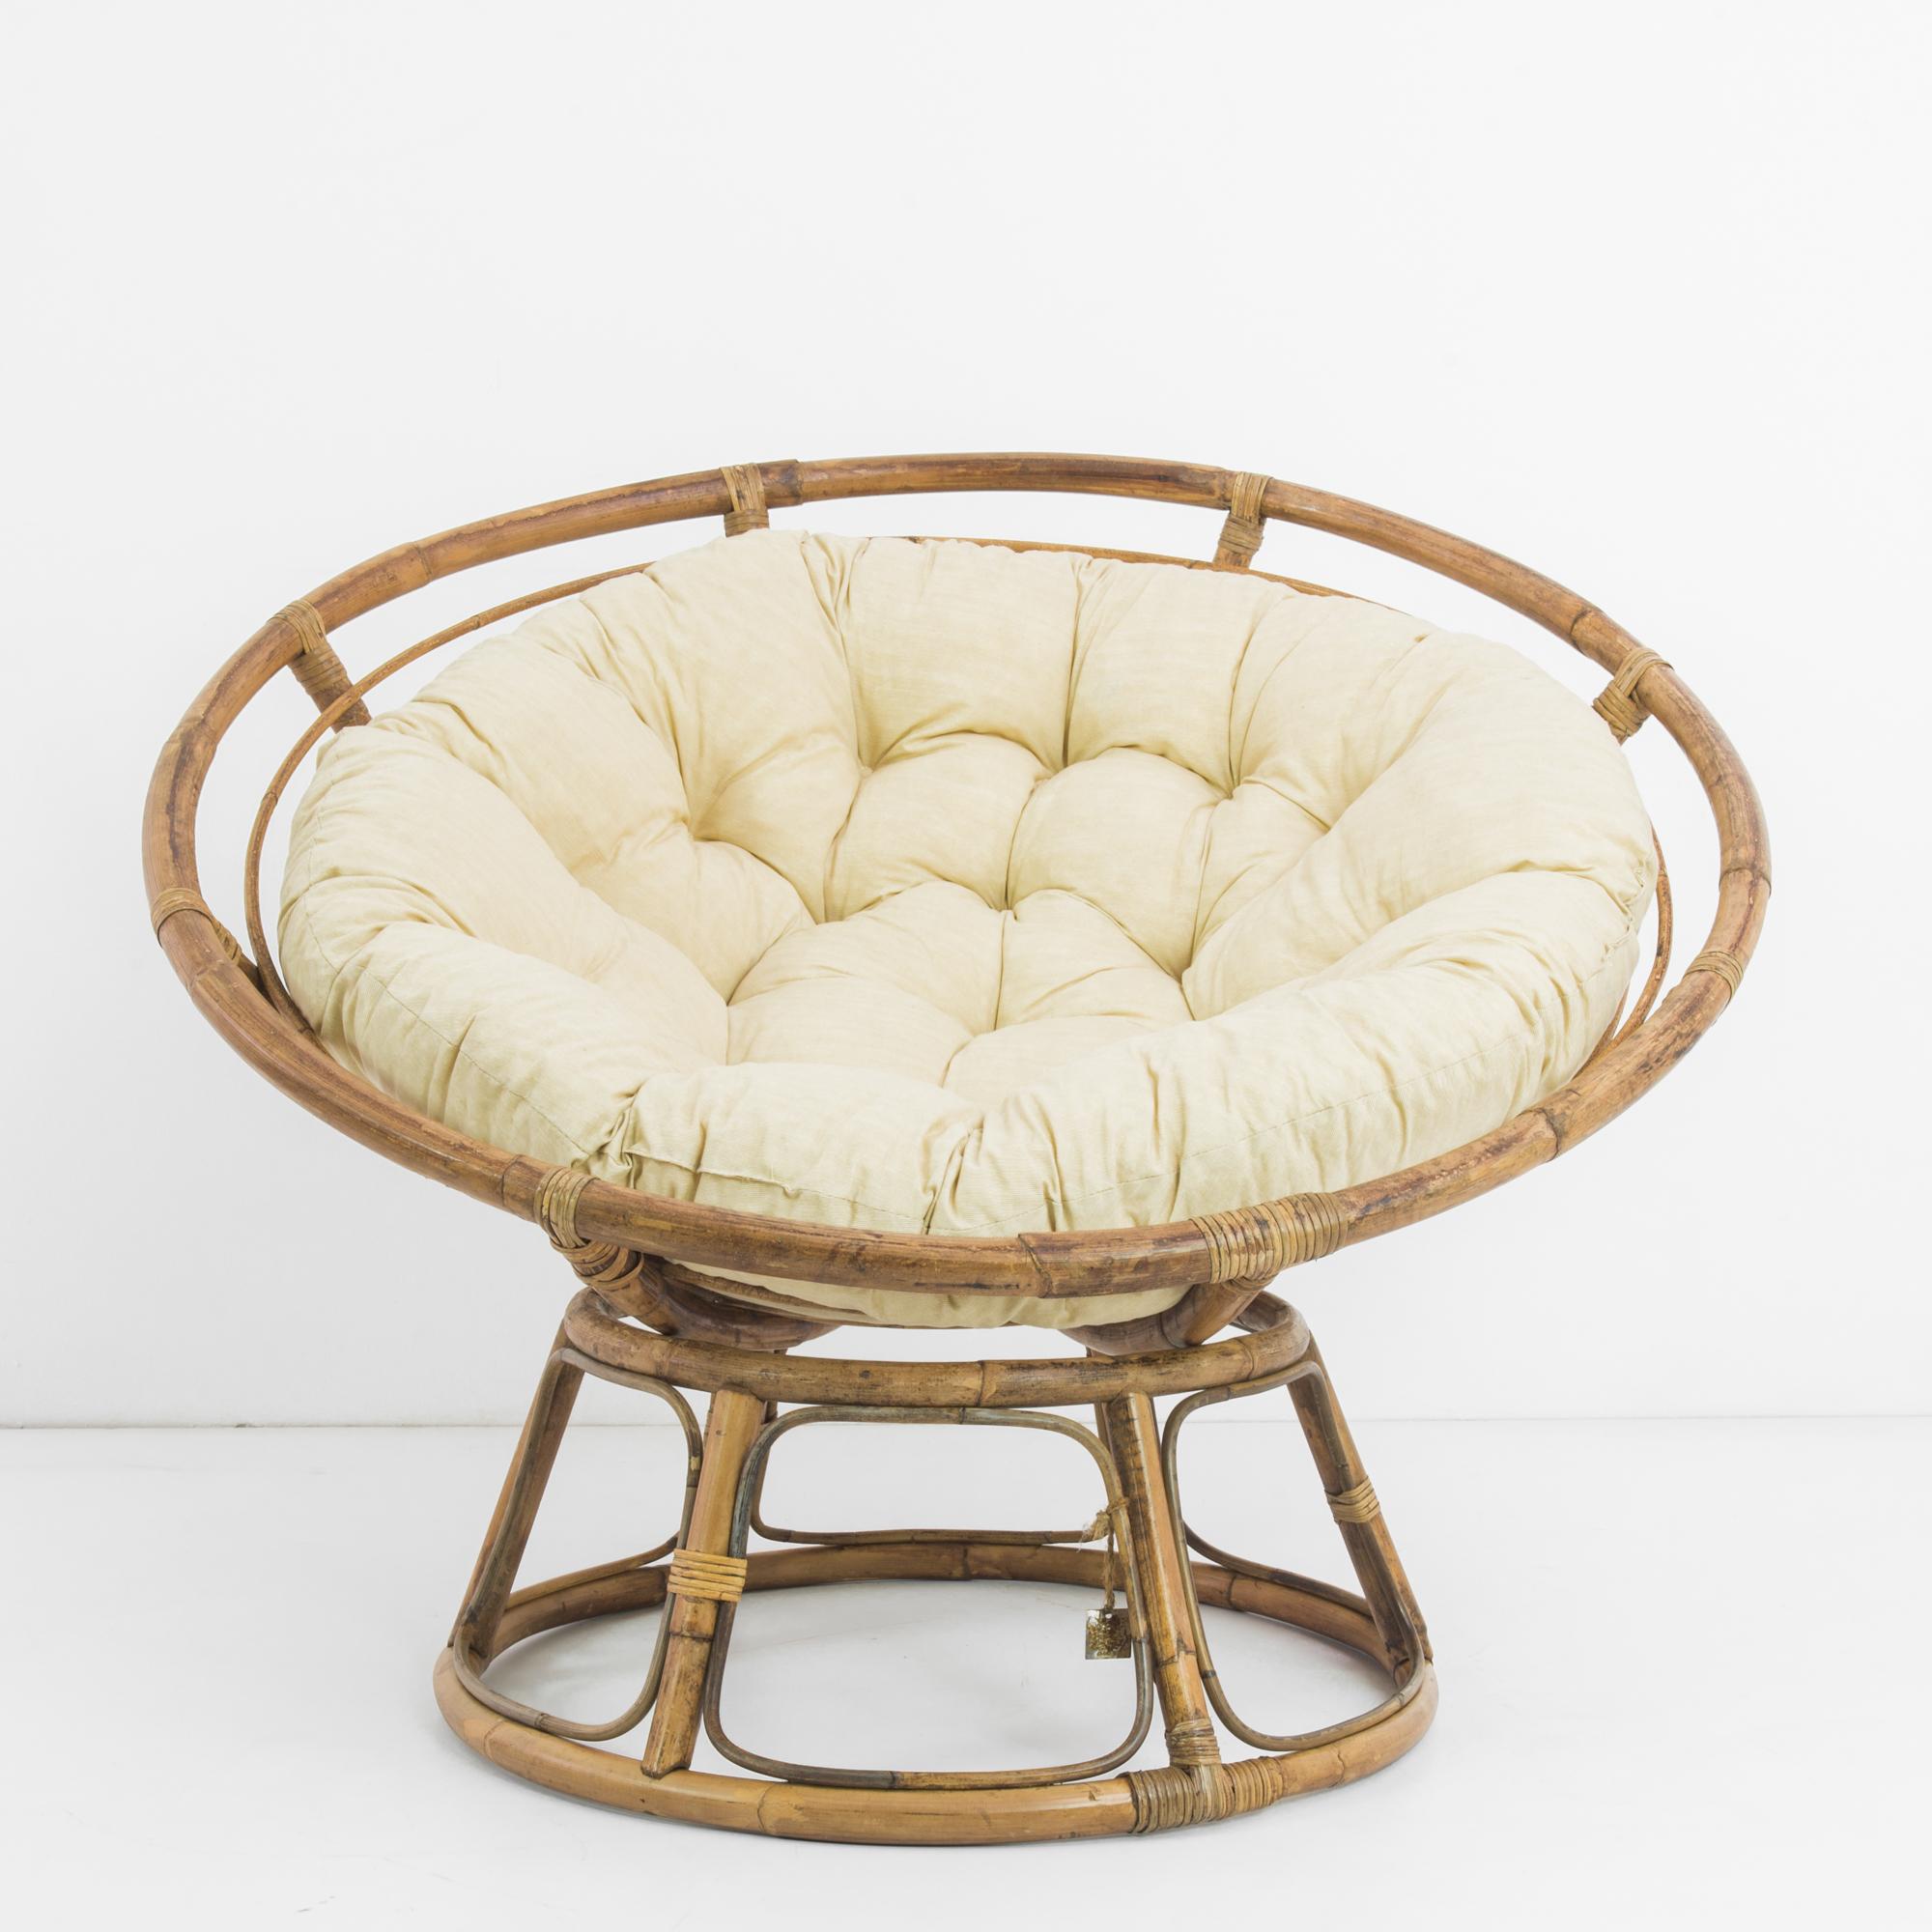 This papasan chair was made in France, circa 1980, and comes with a well-padded cream cushion for comfort and style. The bowl-shaped seat rests on a sturdy base. Handmade with rattan, weathered to a beautiful patina with a lived-in and cozy feel.